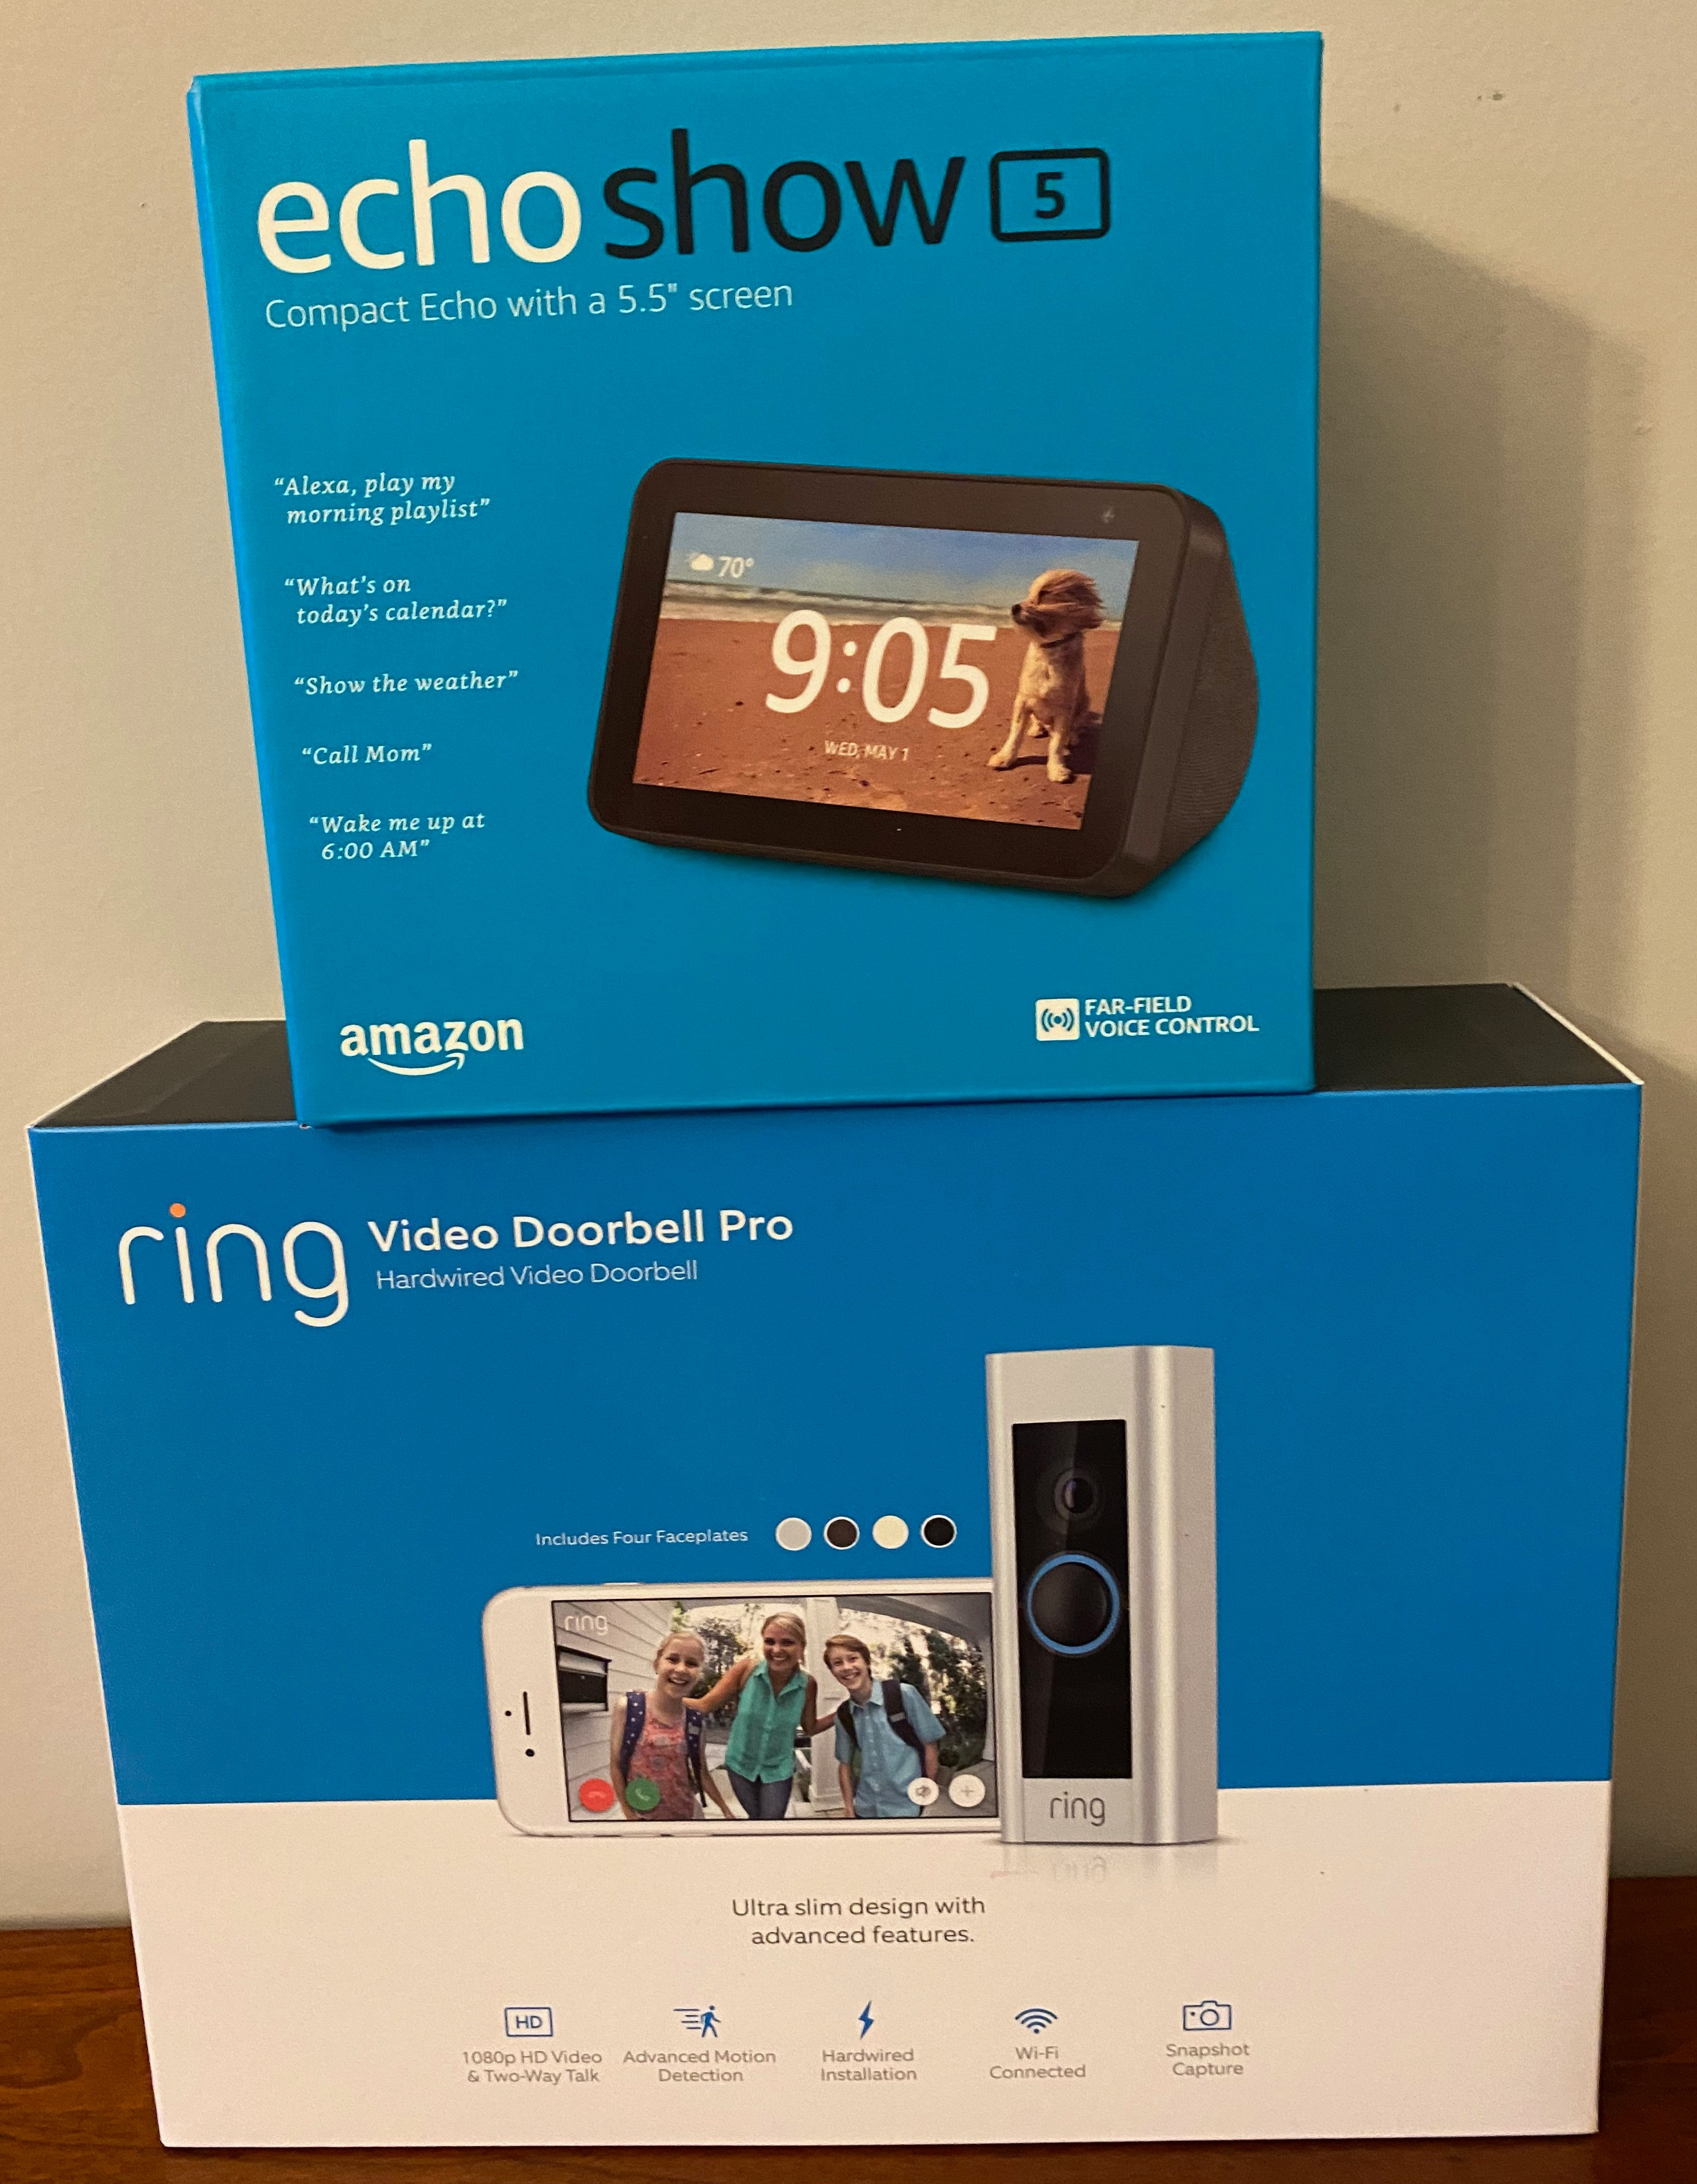 The popular Ring Video Doorbell Pro.  This also includes an Echo Show 5 which connects to Alexa with vivid visuals.